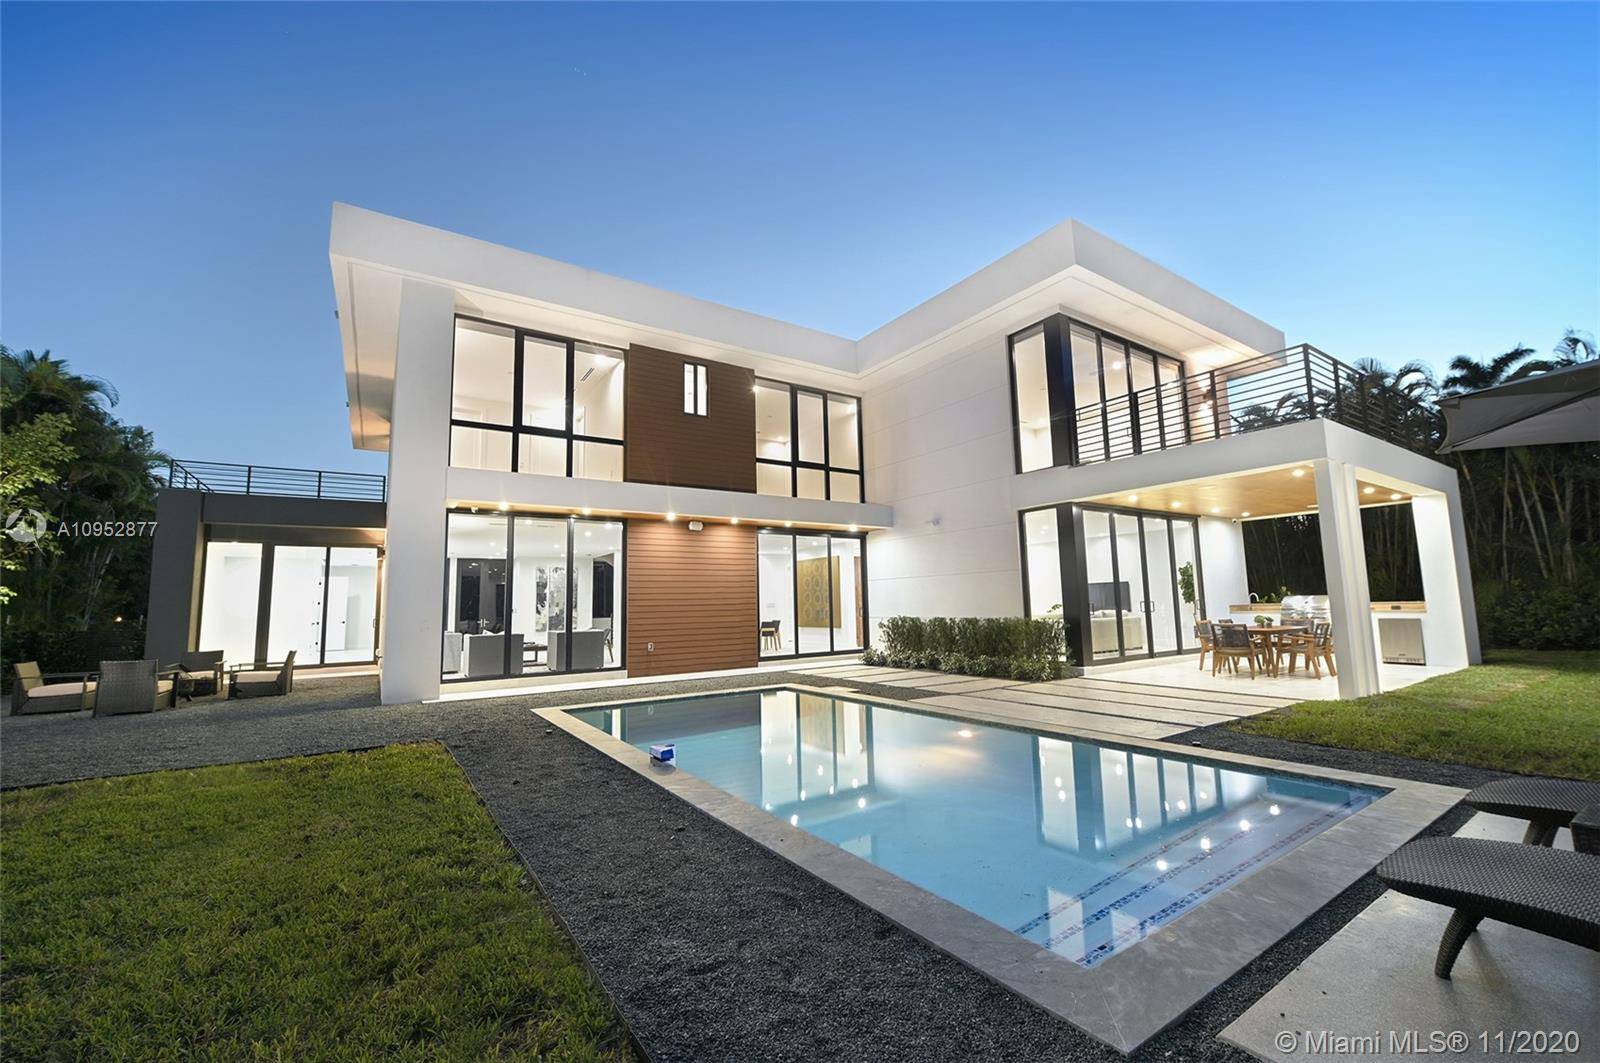 This warm architectural contemporary home is set in the hotbed of South Miami.